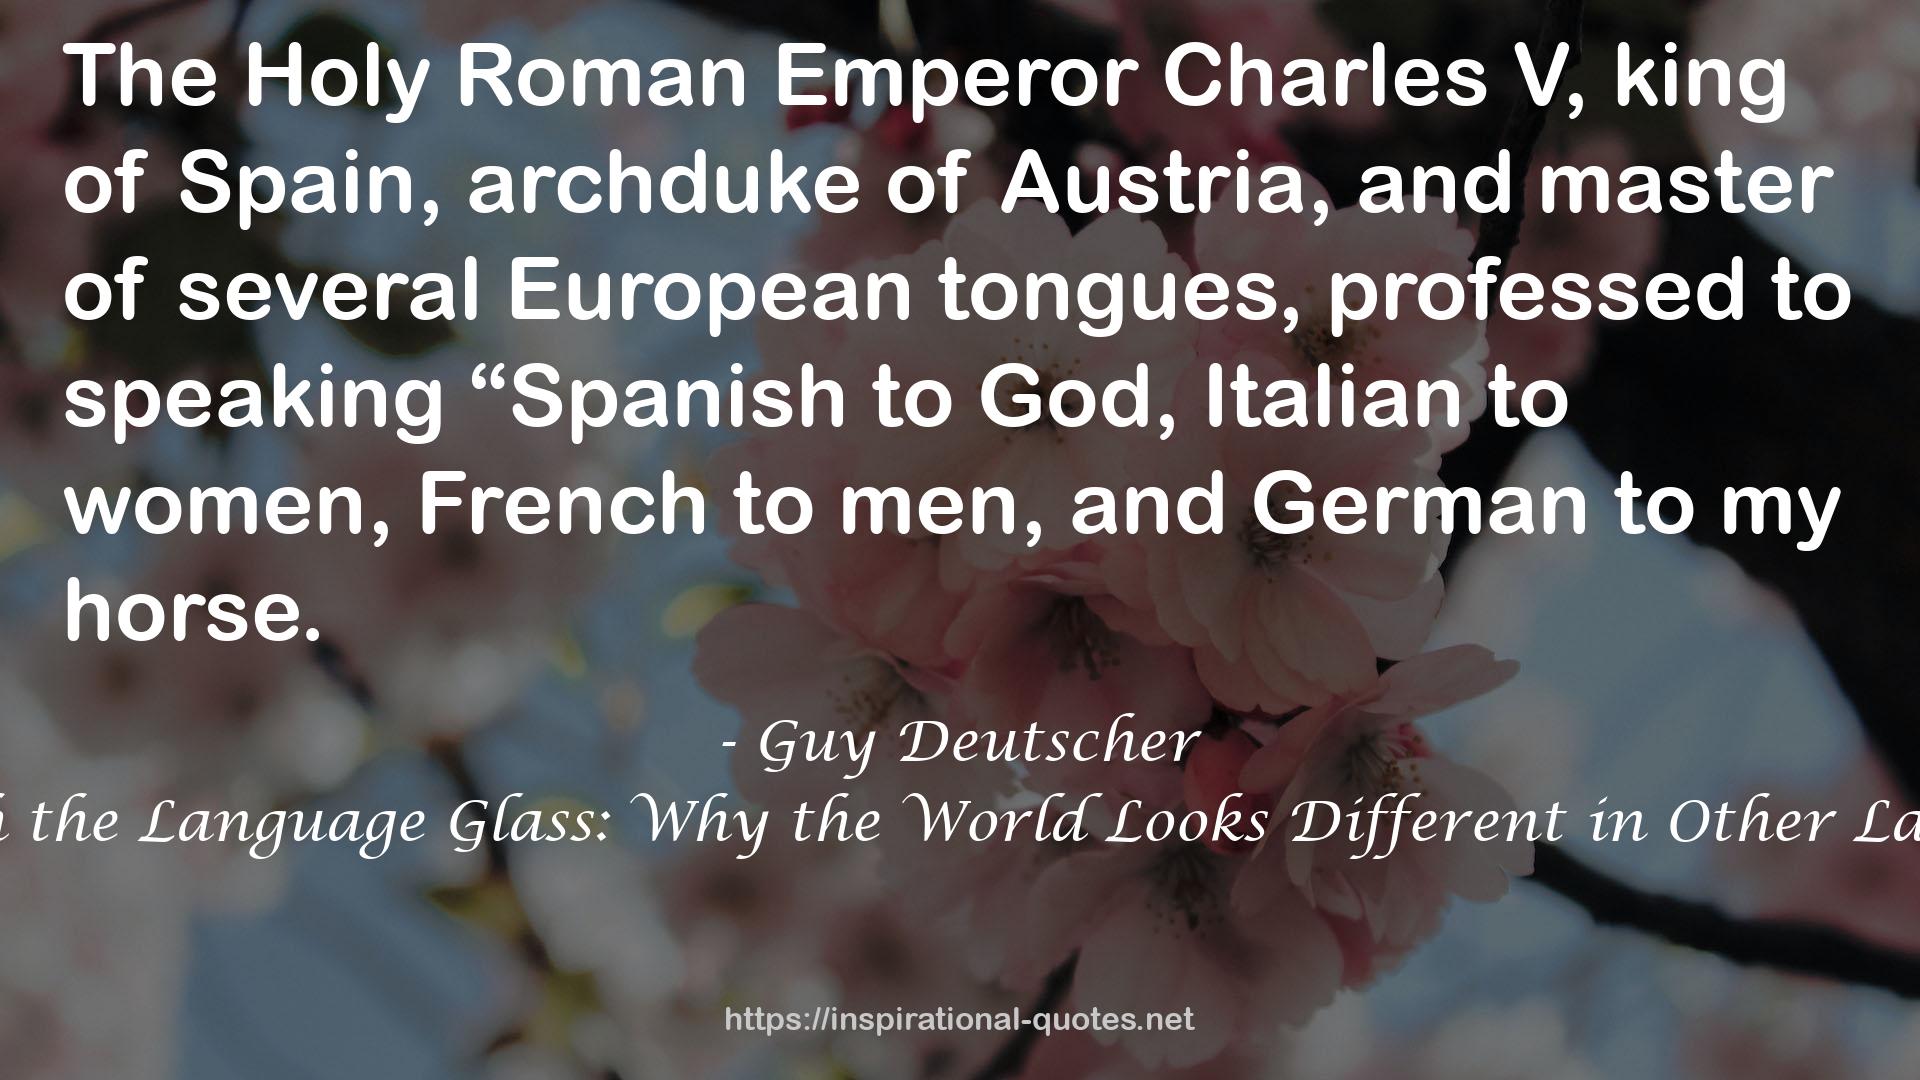 Through the Language Glass: Why the World Looks Different in Other Languages QUOTES